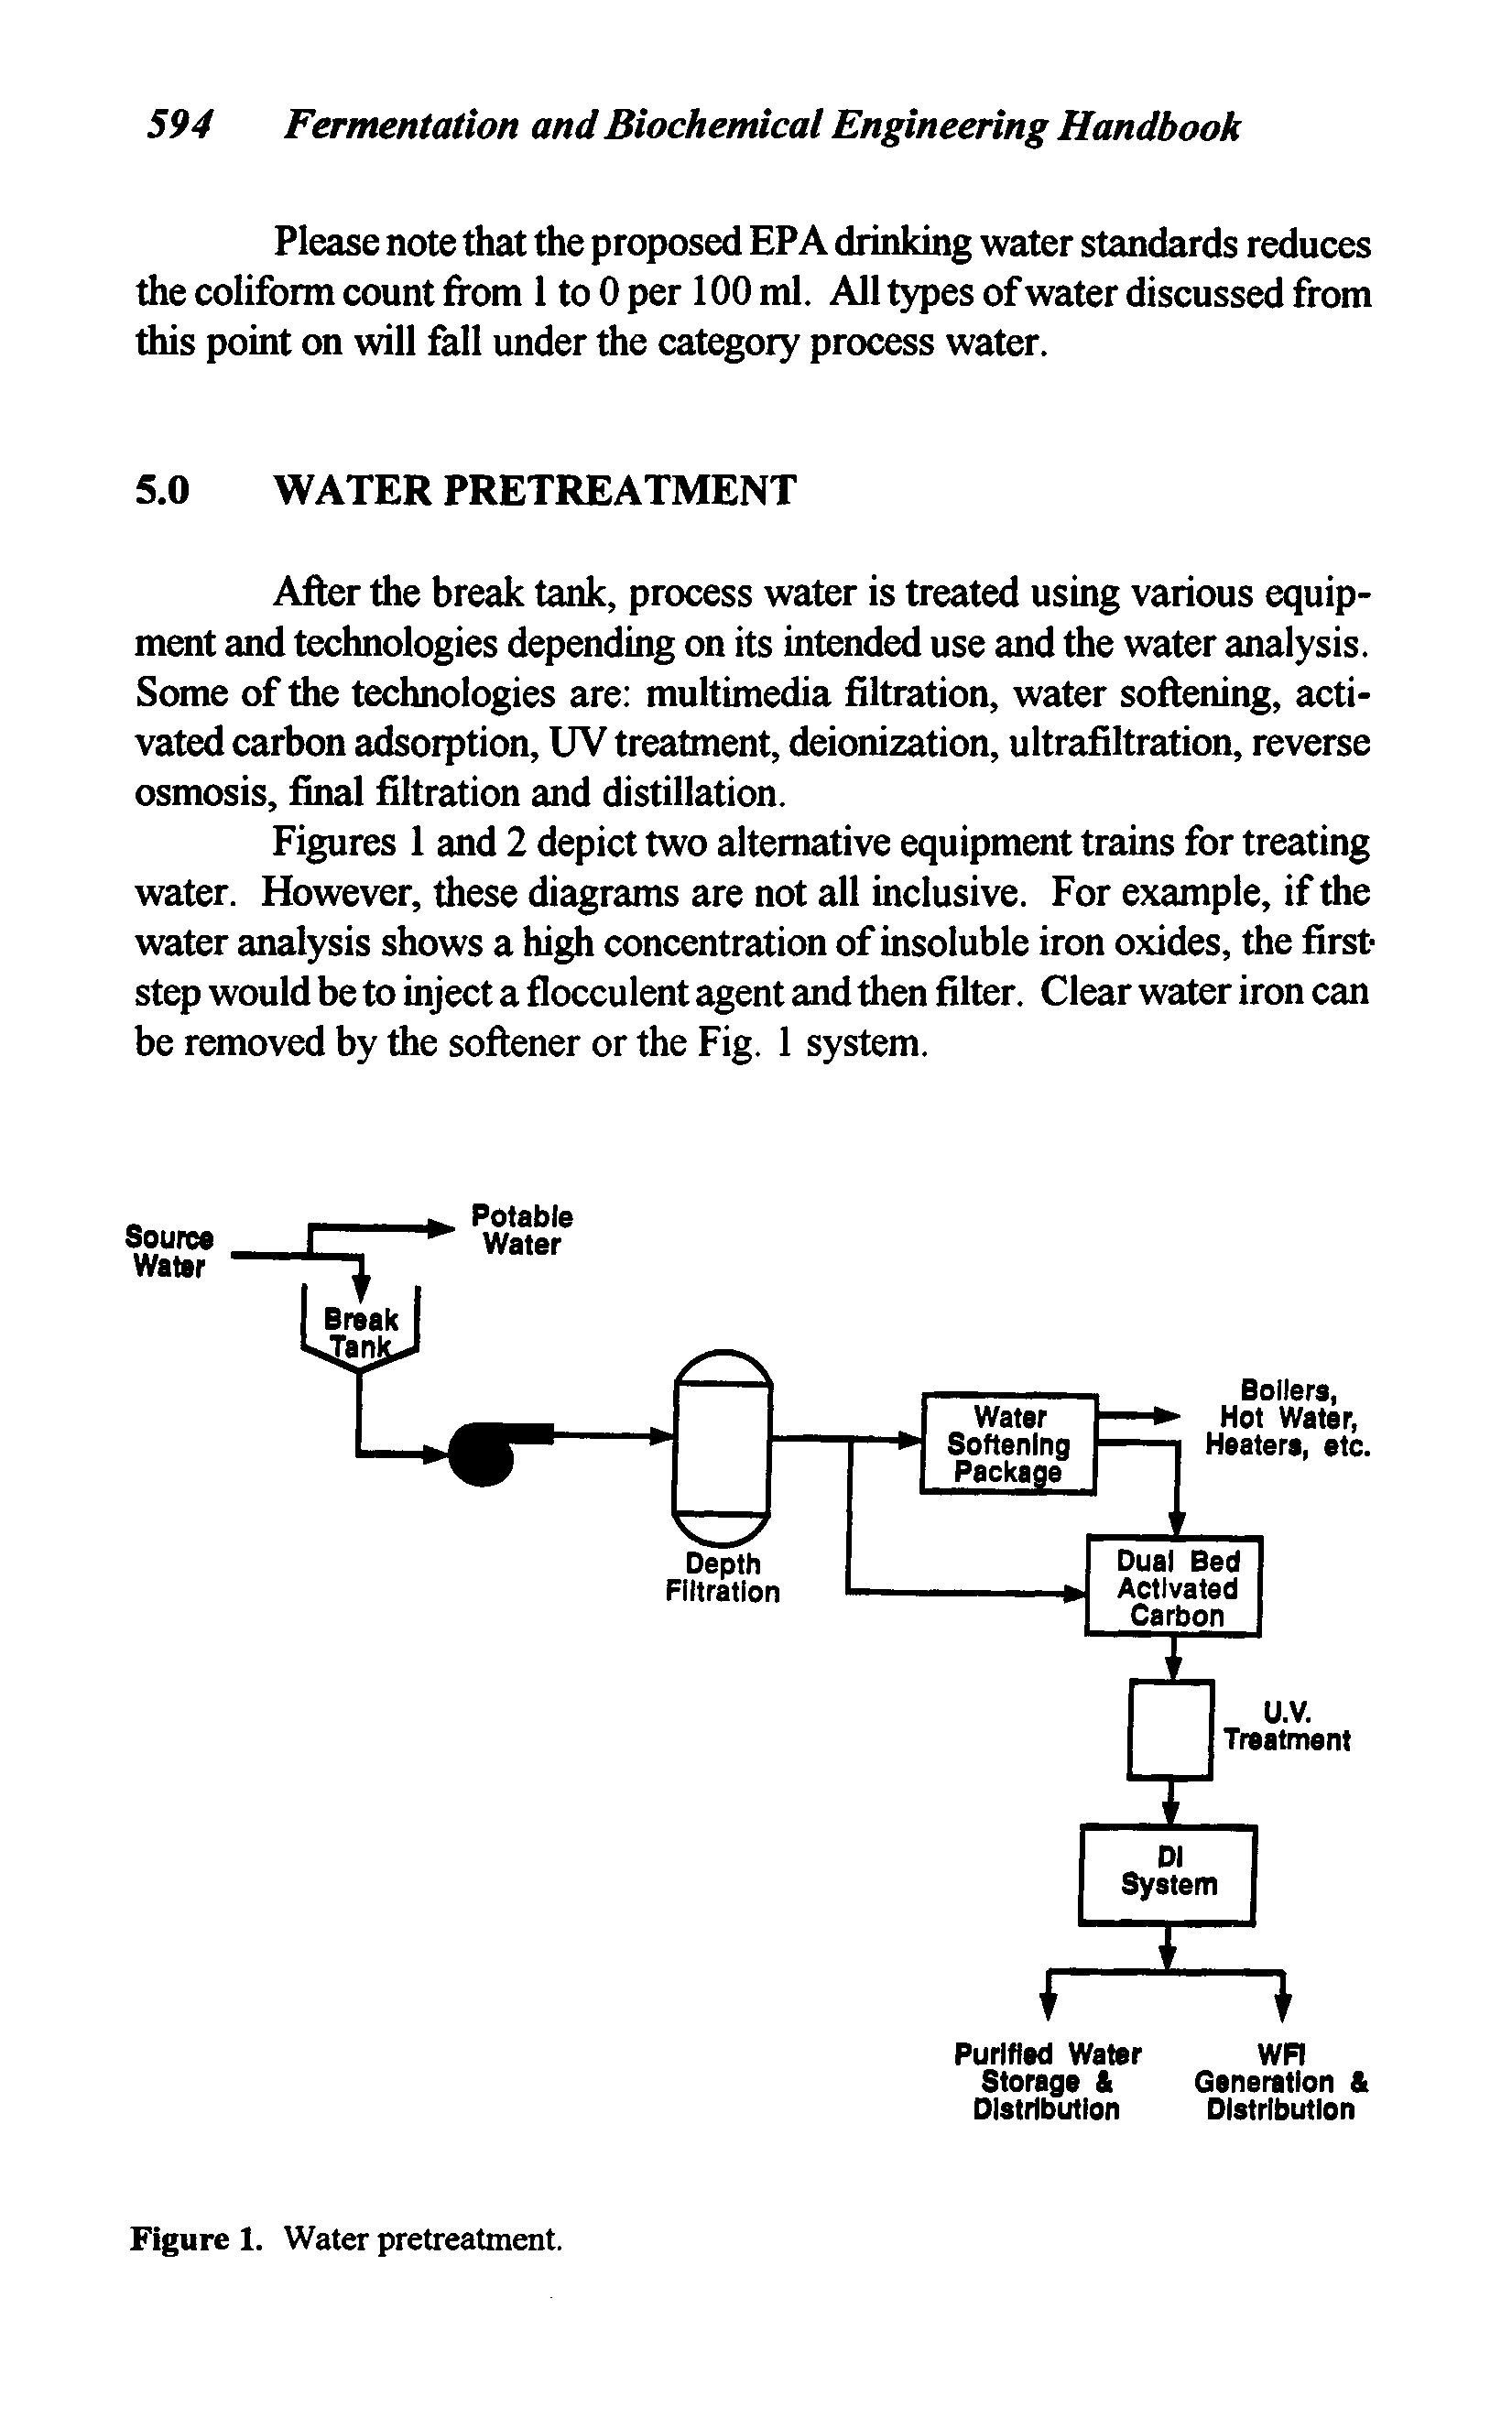 Figures 1 and 2 depict two alternative equipment trains for treating water. However, these diagrams are not all inclusive. For example, if the water analysis shows a high concentration of insoluble iron oxides, the first-step would be to inject a flocculent agent and then filter. Clear water iron can be removed by the softener or the Fig. 1 system.